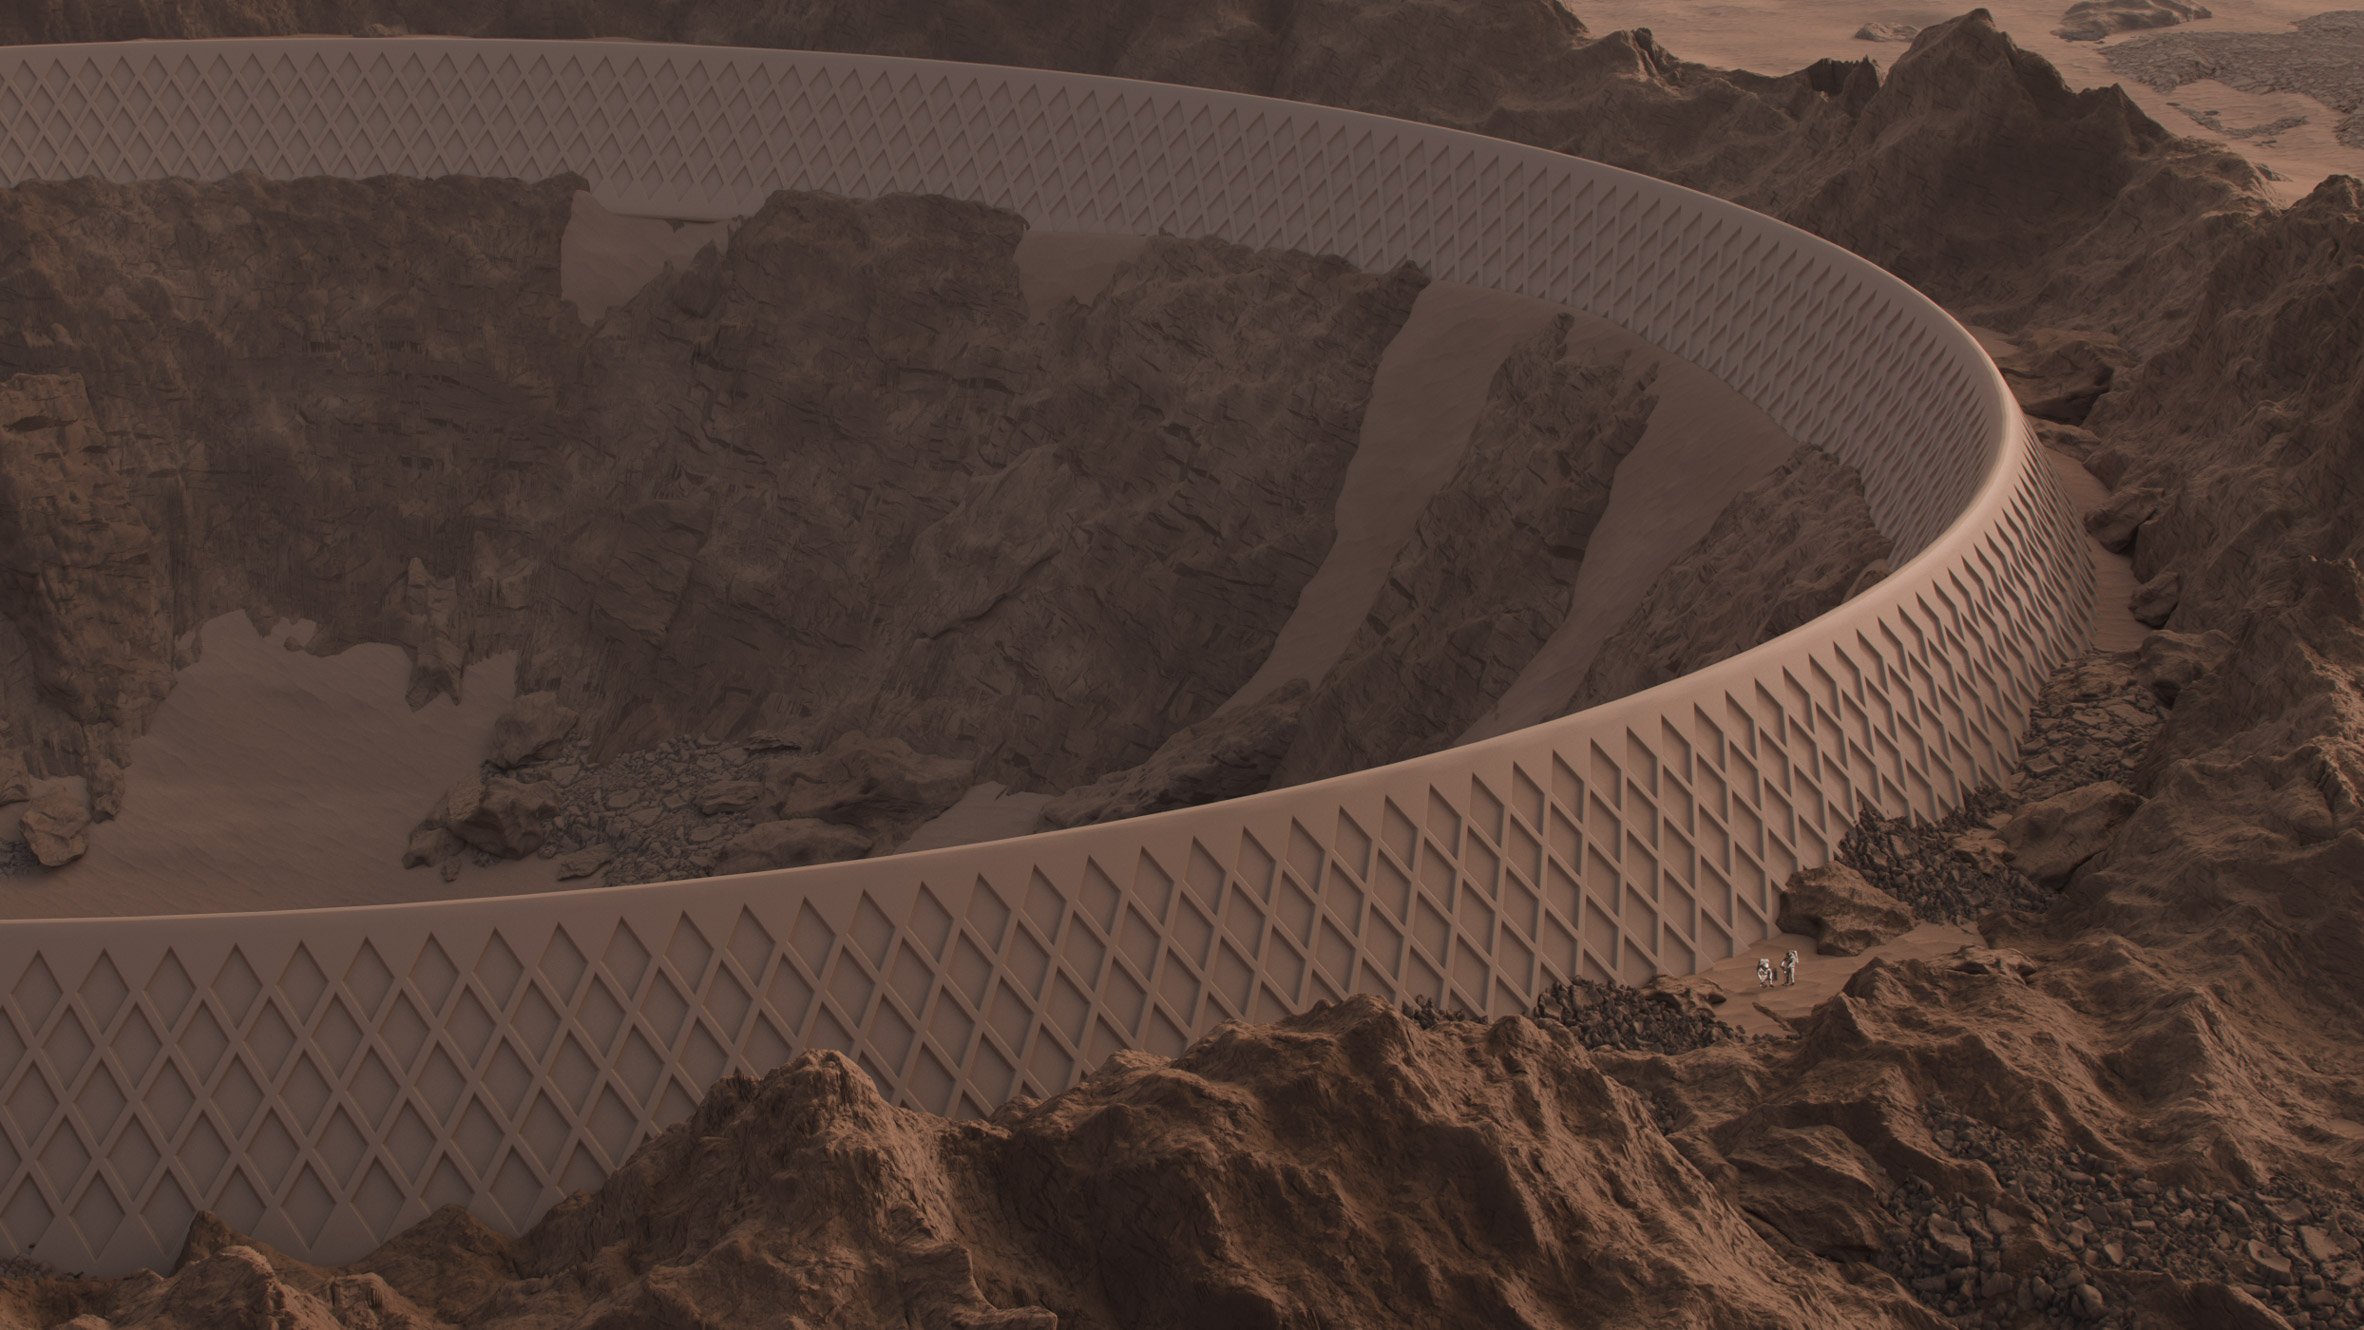 The Mars settlement will be built in a crater